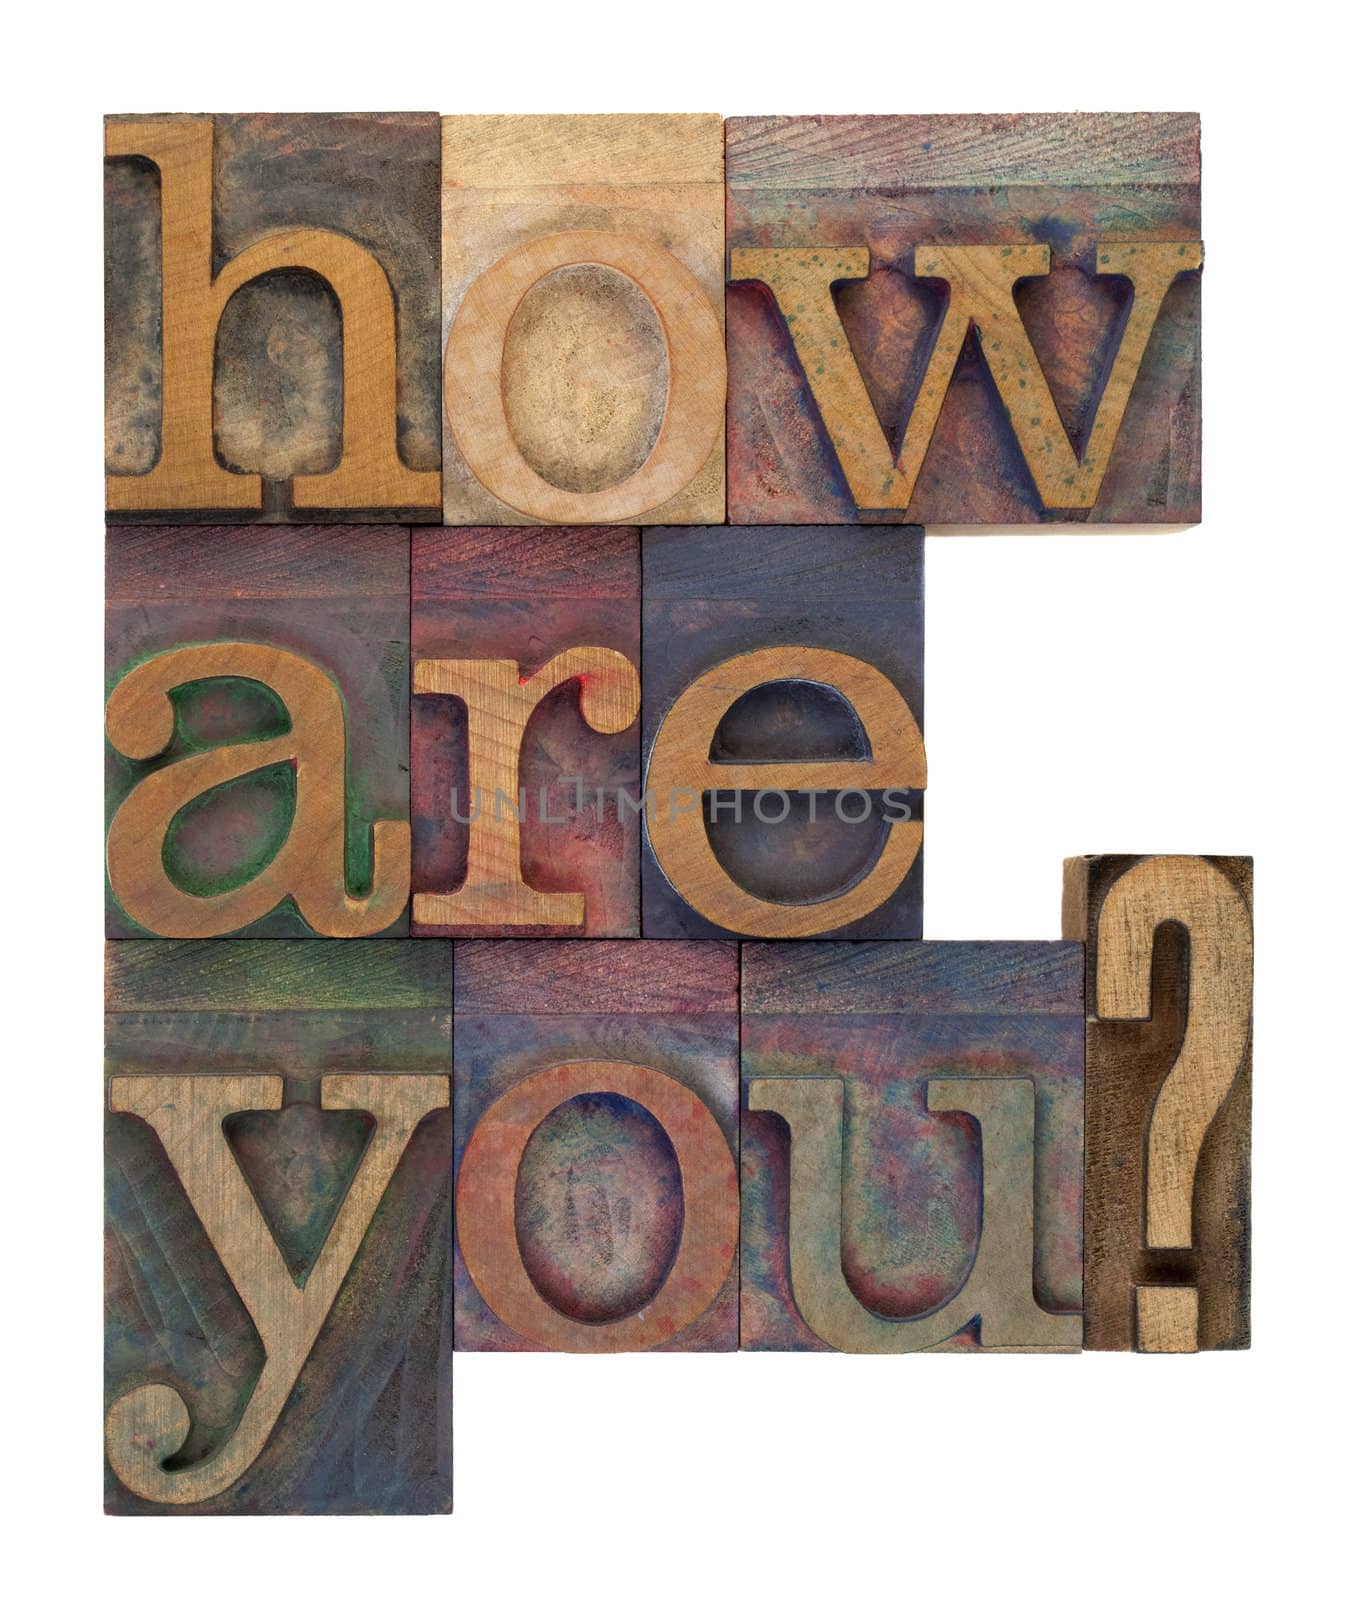 how are you question in vintage wooden letterpress type bloacks, stained by color ink, isolated on white